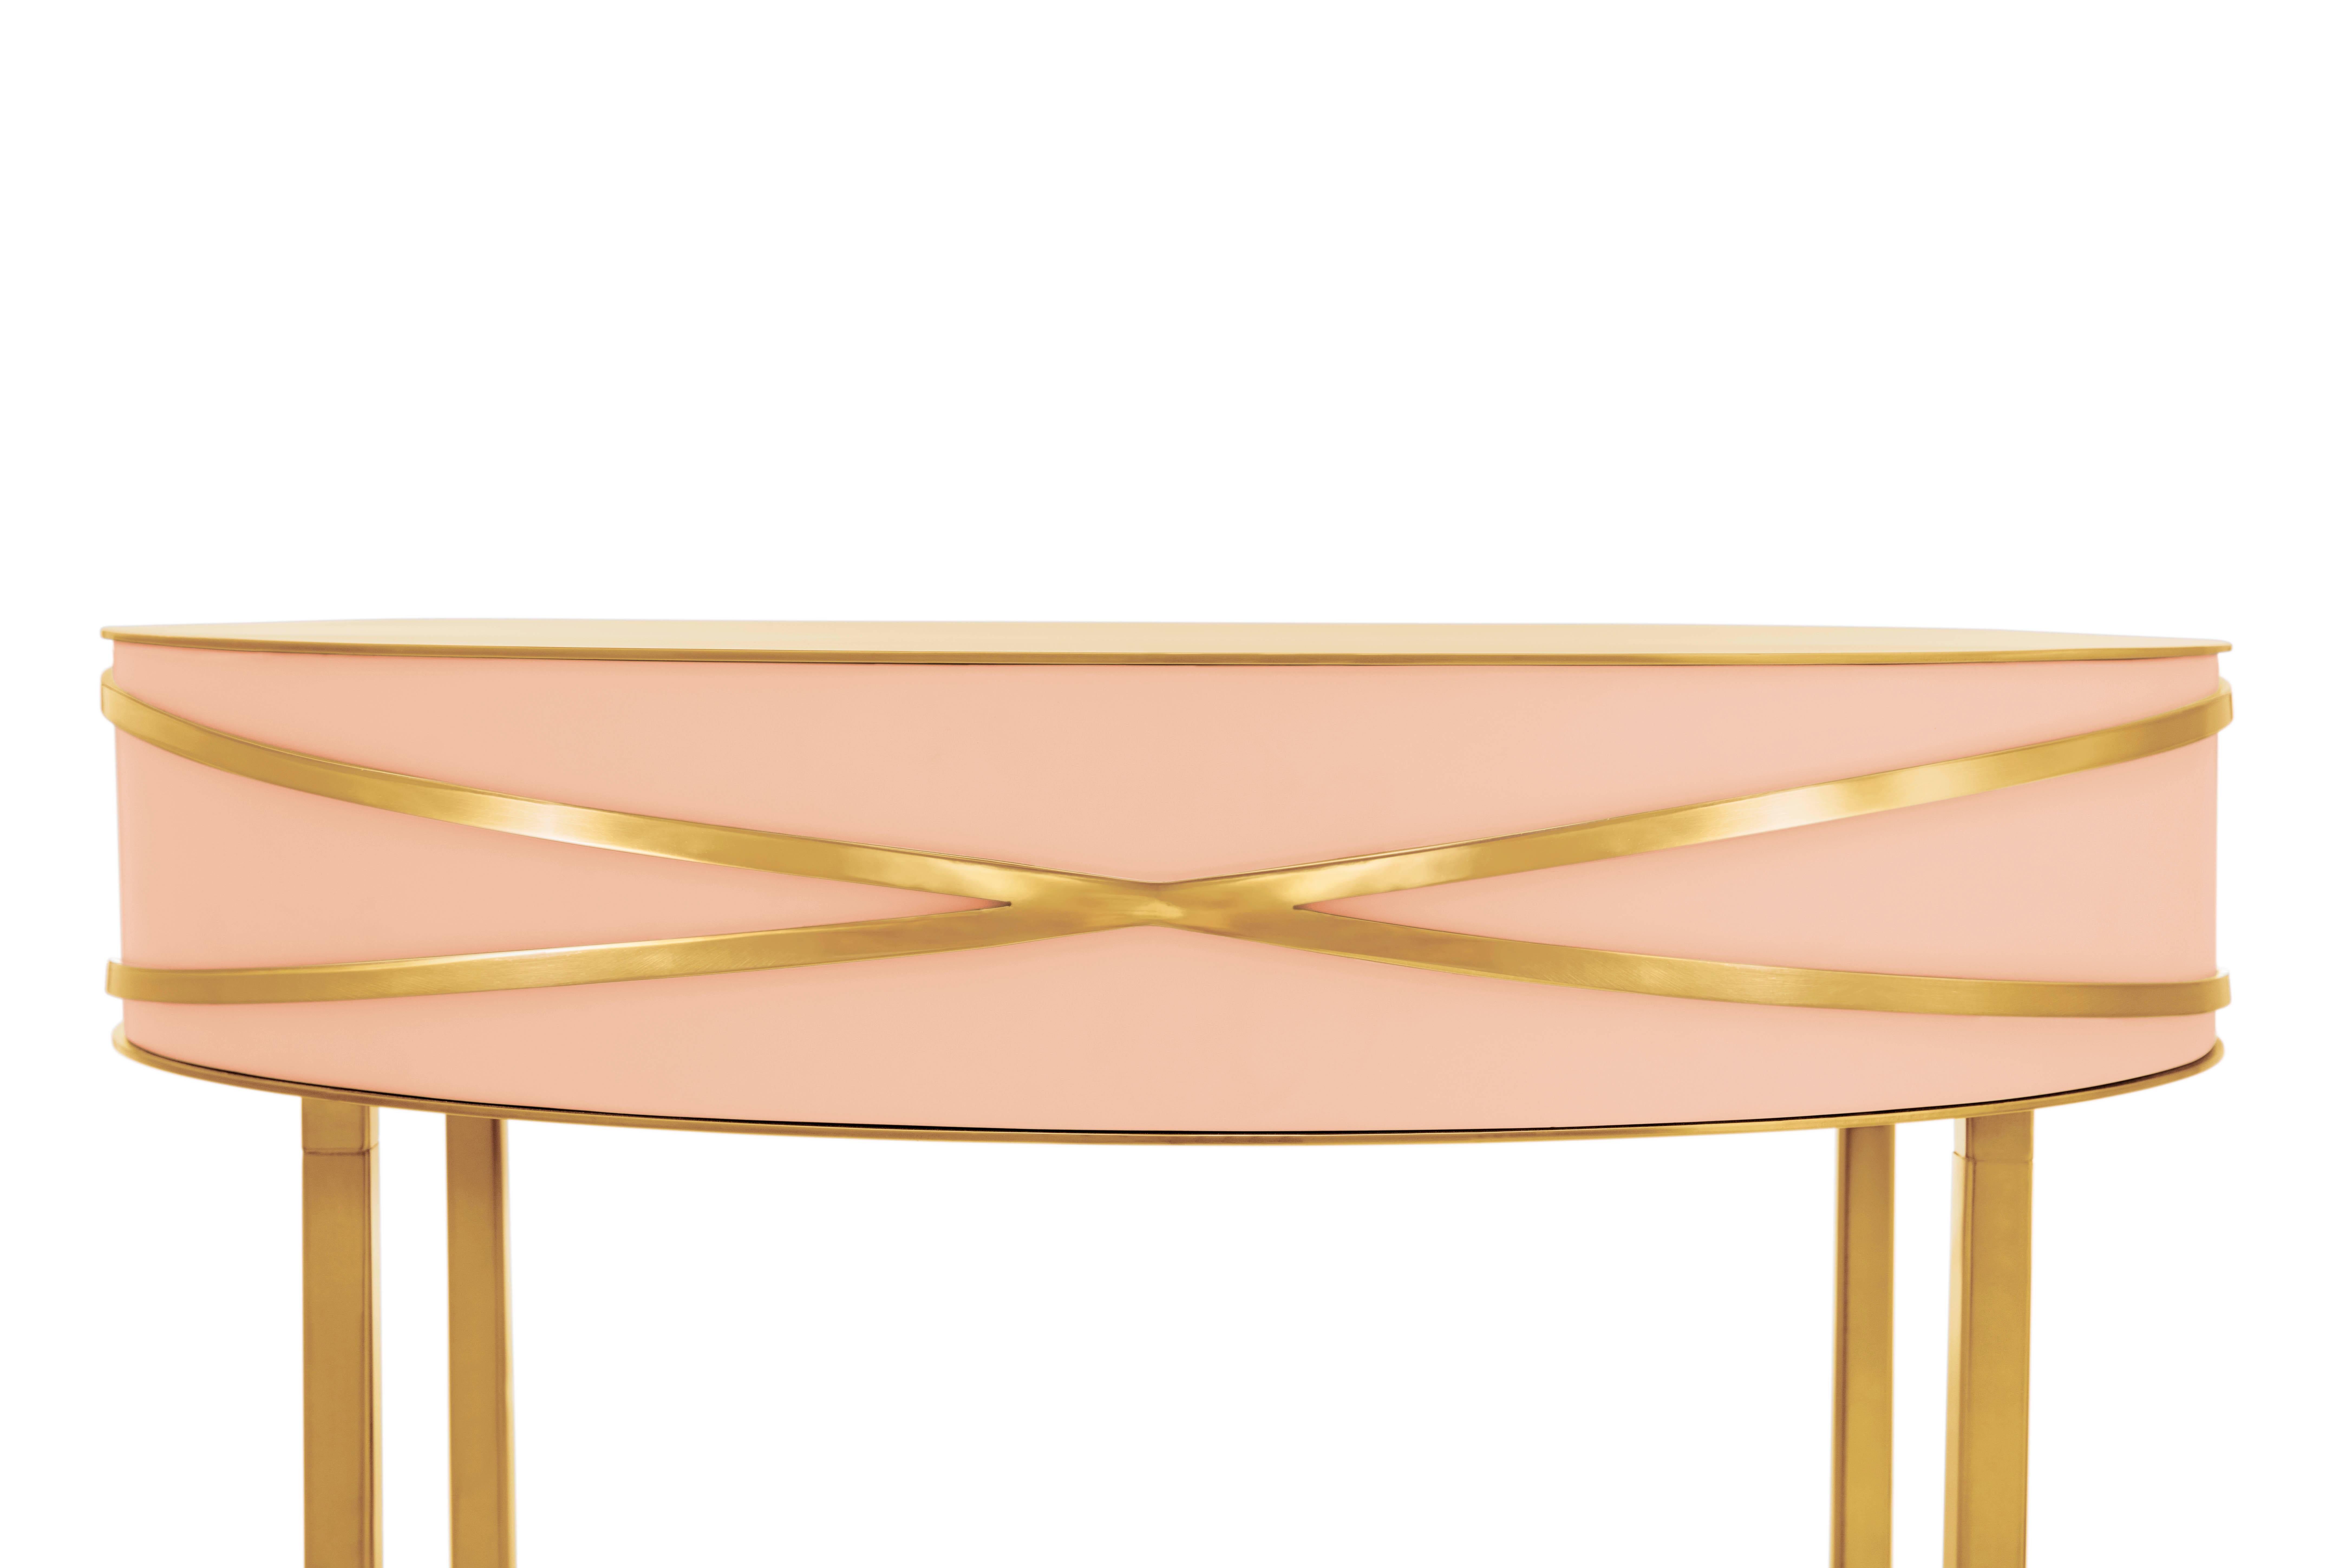 Stella Pink Console or Bedside Table with Gold Trims by Nika Zupanc is a pink console table with a drawer and metal trims in gold.

Nika Zupanc, a strikingly renowned Slovenian designer, never shies away from redefining the status quo of design,